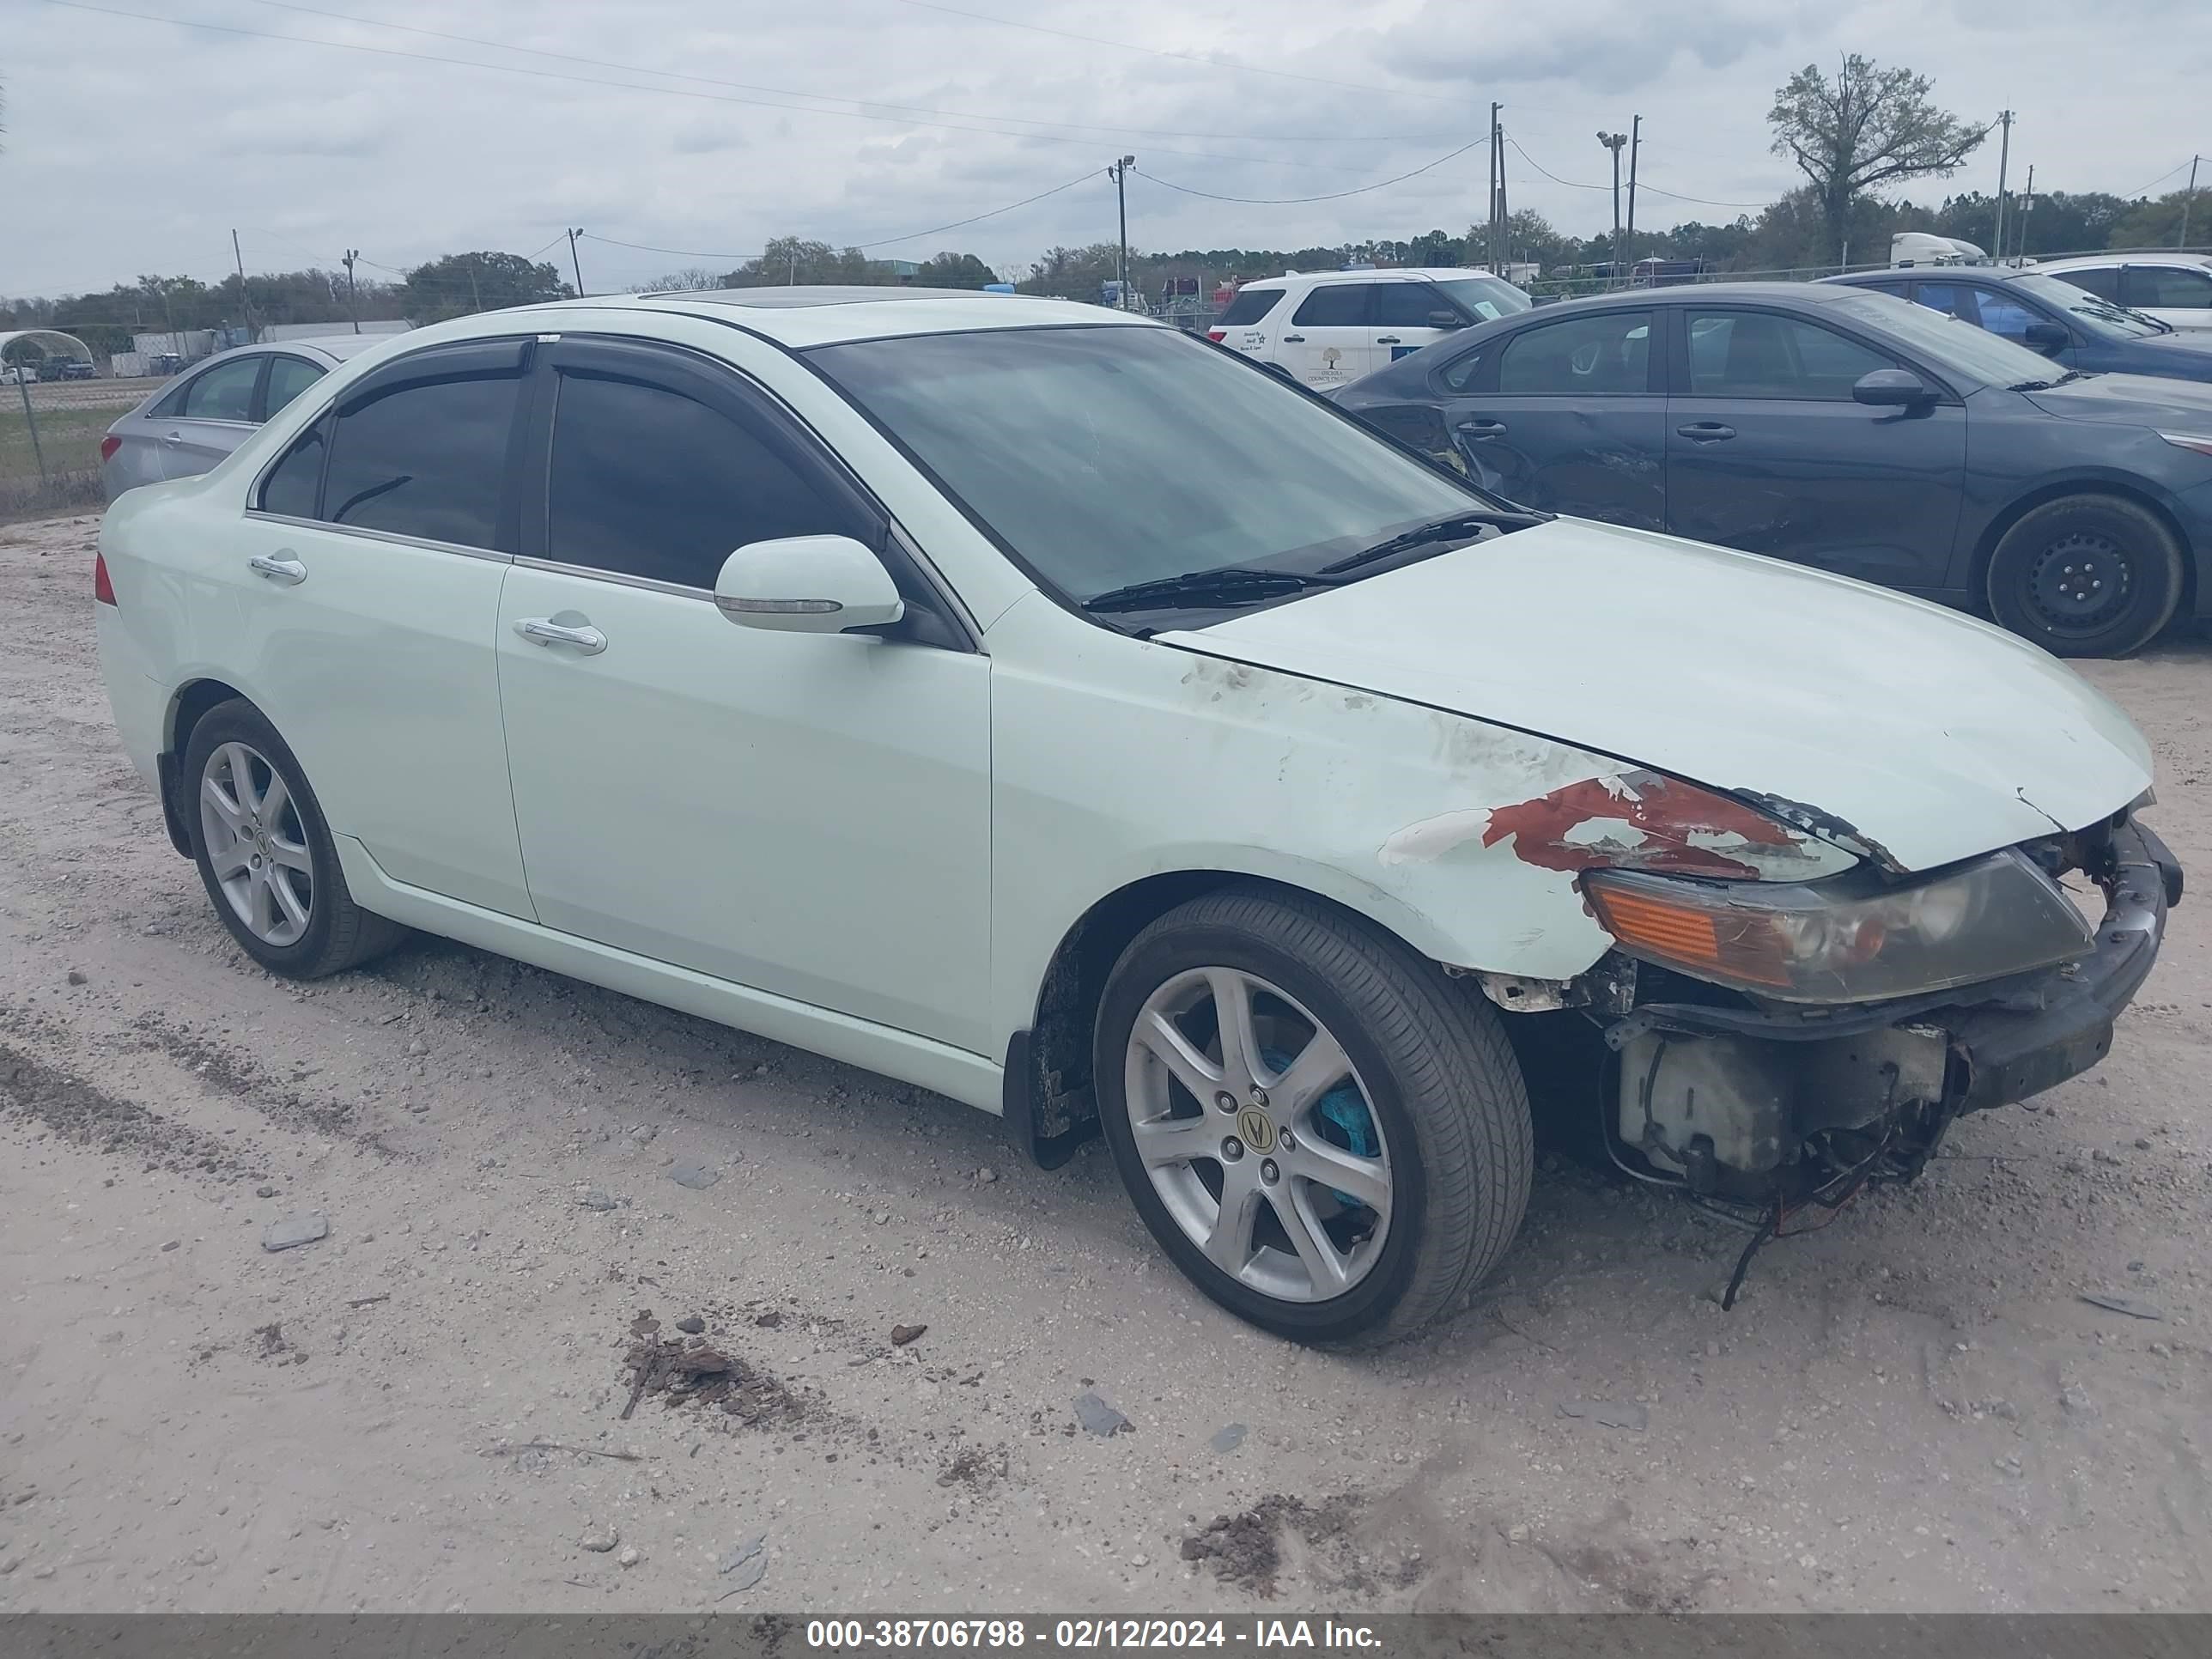 vin: JH4CL96885C026534 JH4CL96885C026534 2005 acura tsx 2400 for Sale in 32824, 9801 Boggy Creek Rd, Orlando, USA